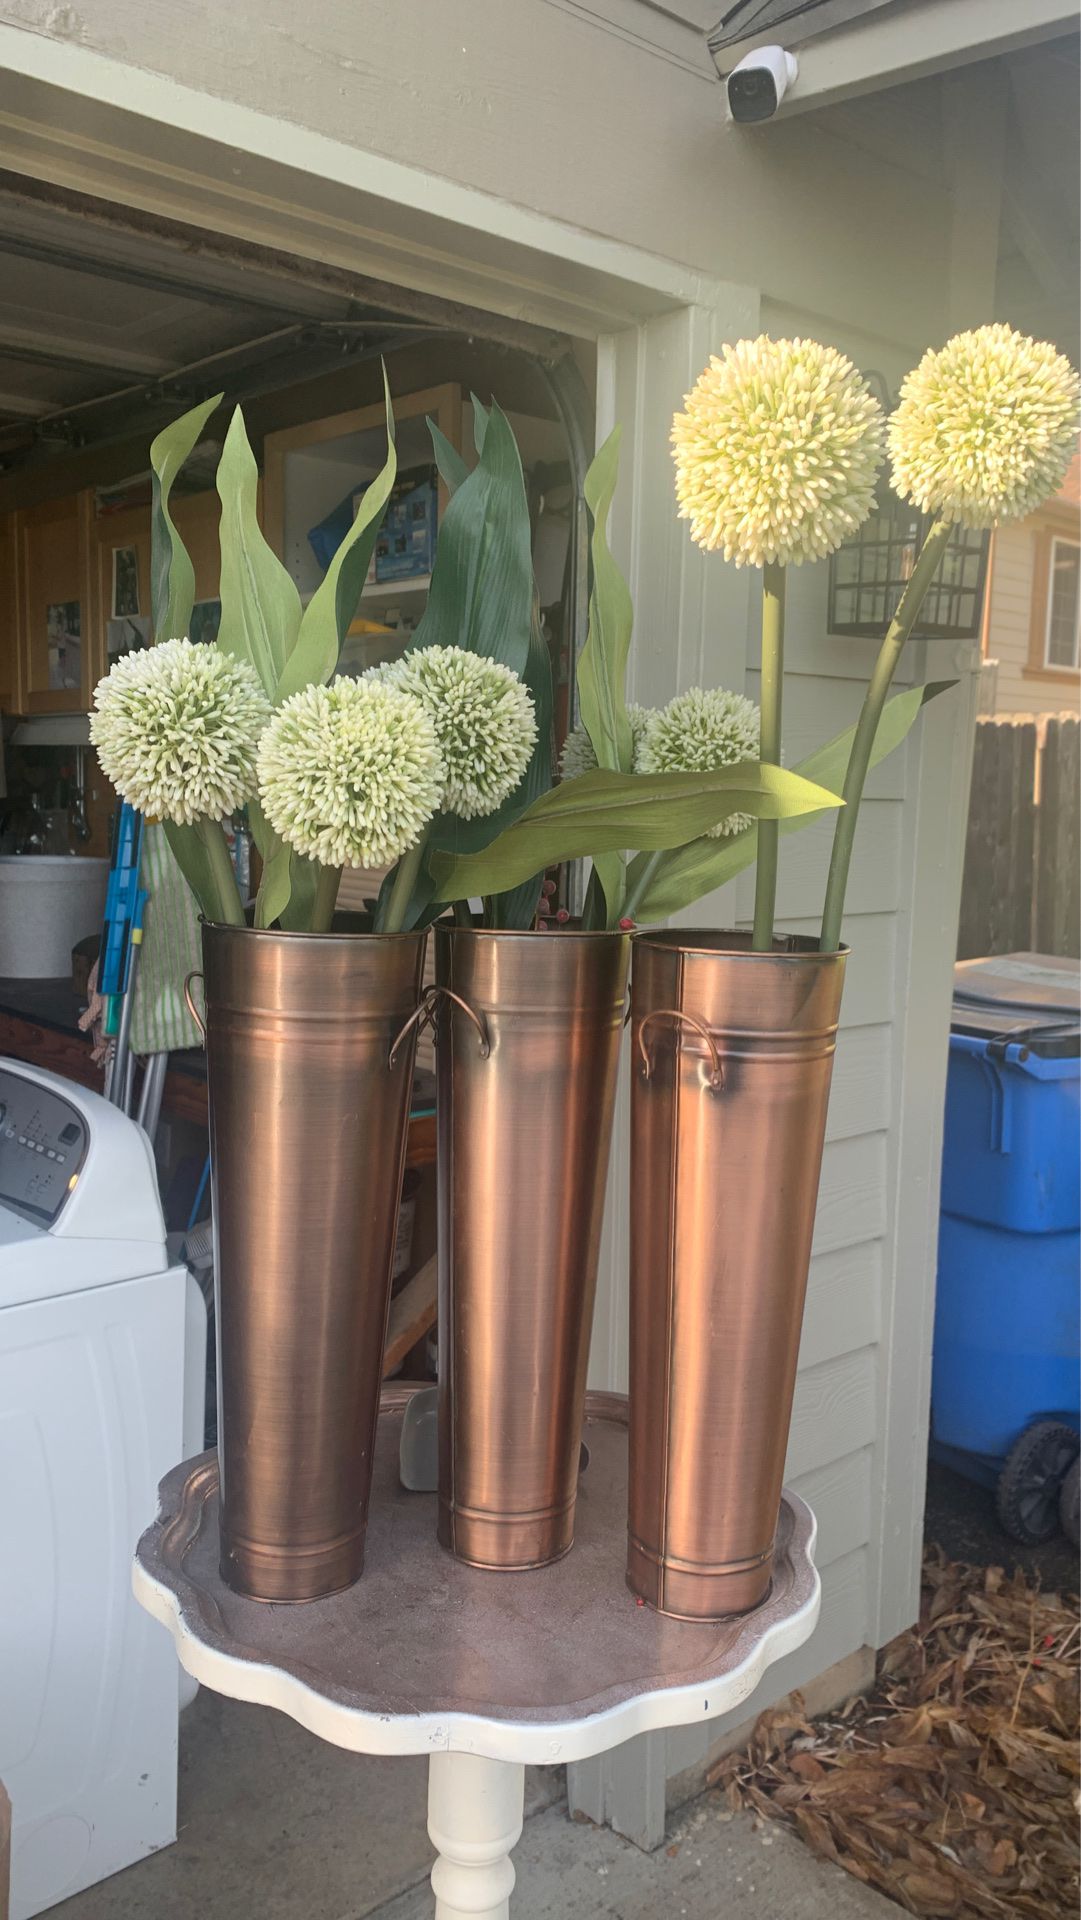 3 brass colored vases for decor including flowers